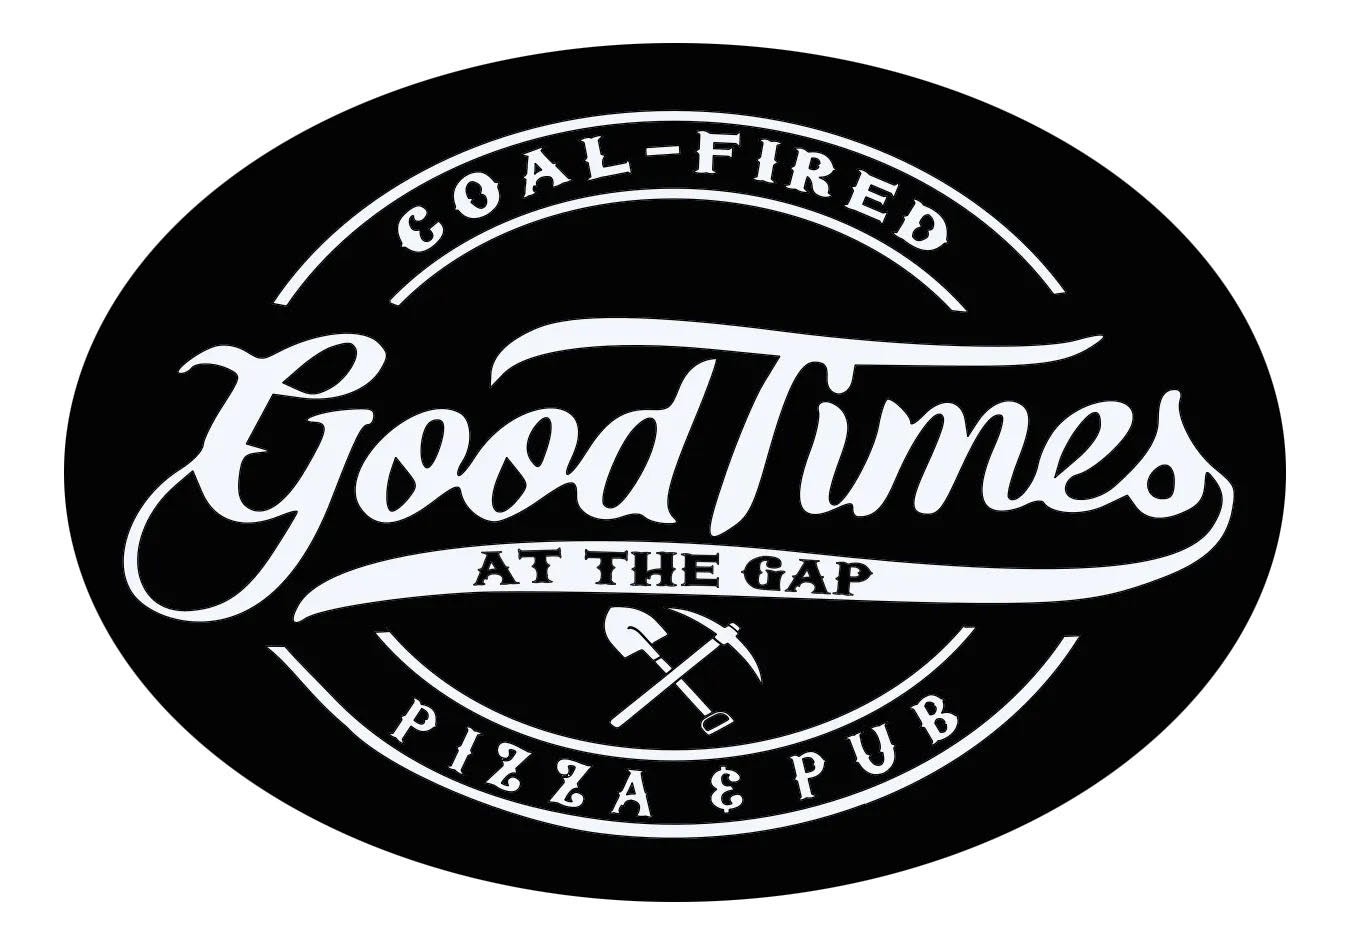 GoodTimes Coal-Fired Pizza and Pub 